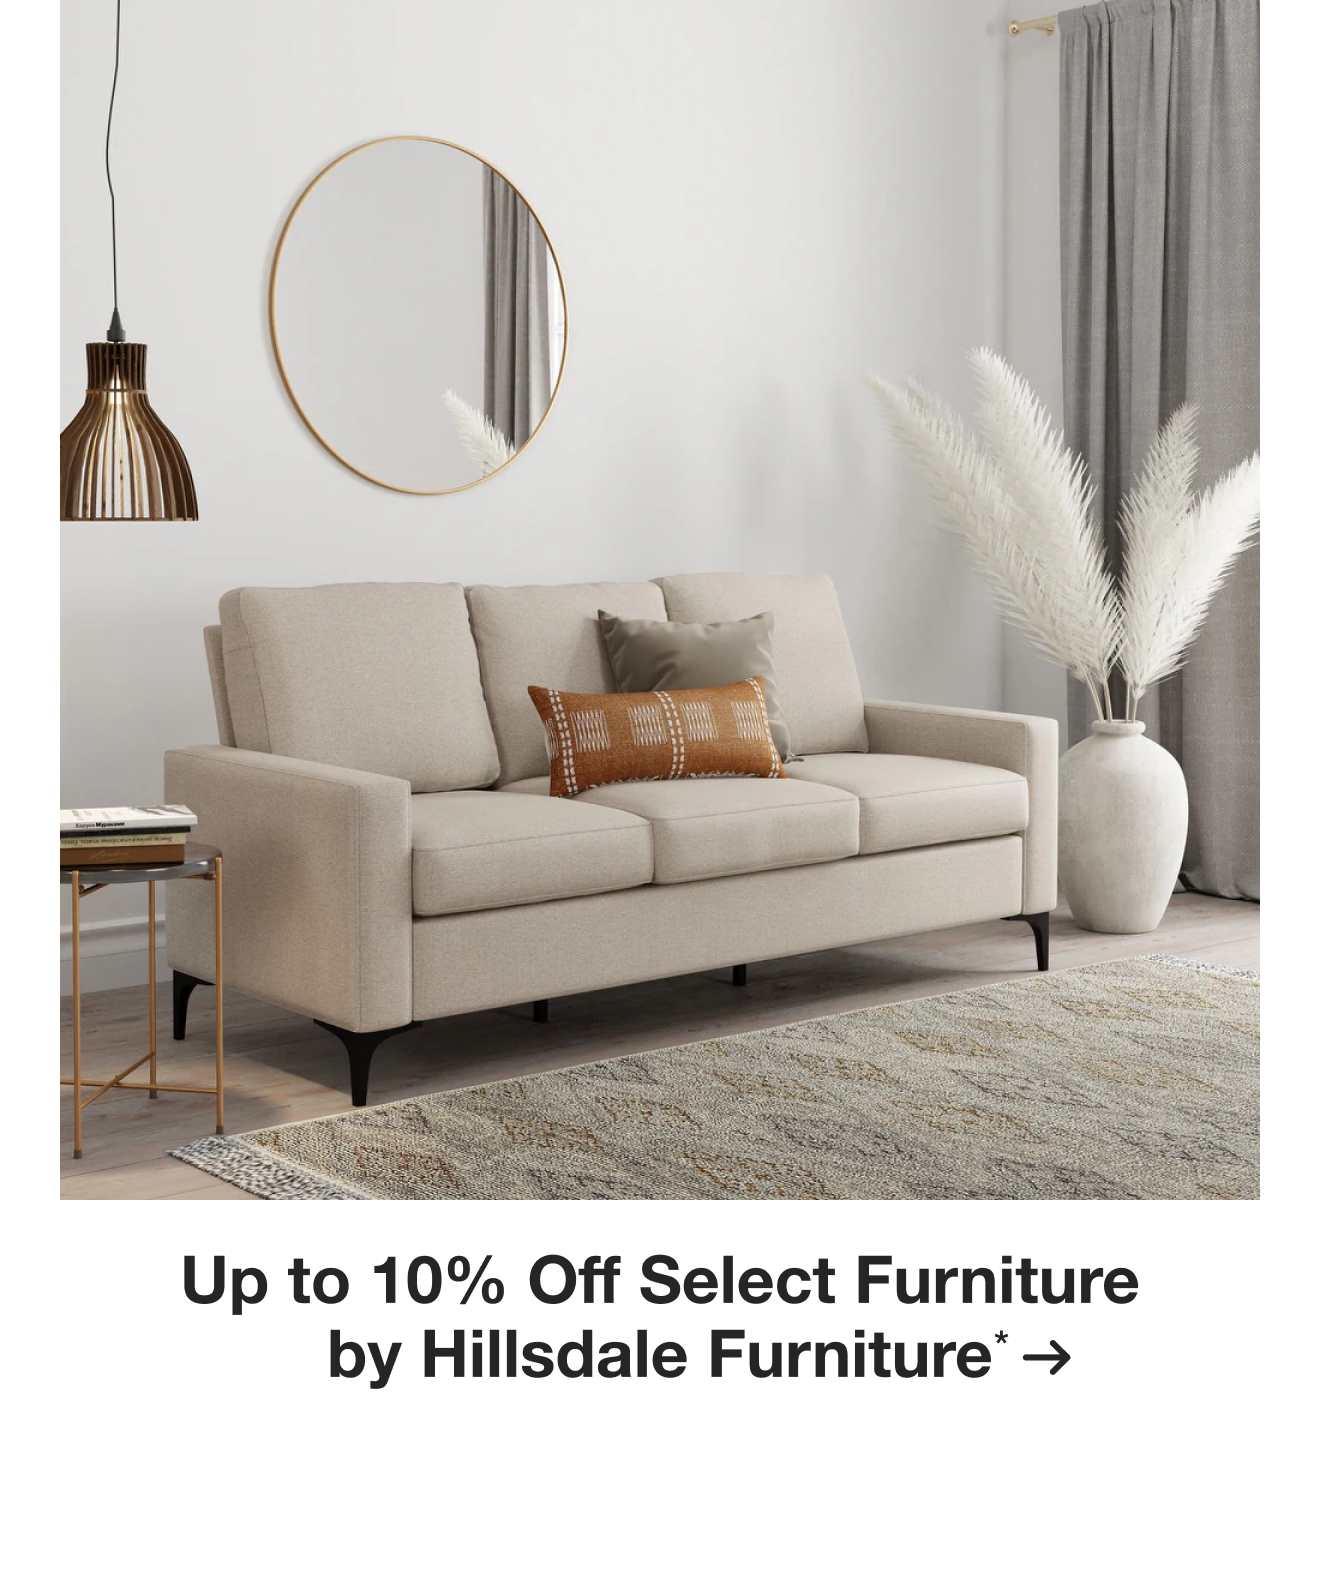 Up to 10% Off Select Furniture by Hillsdale Furniture*